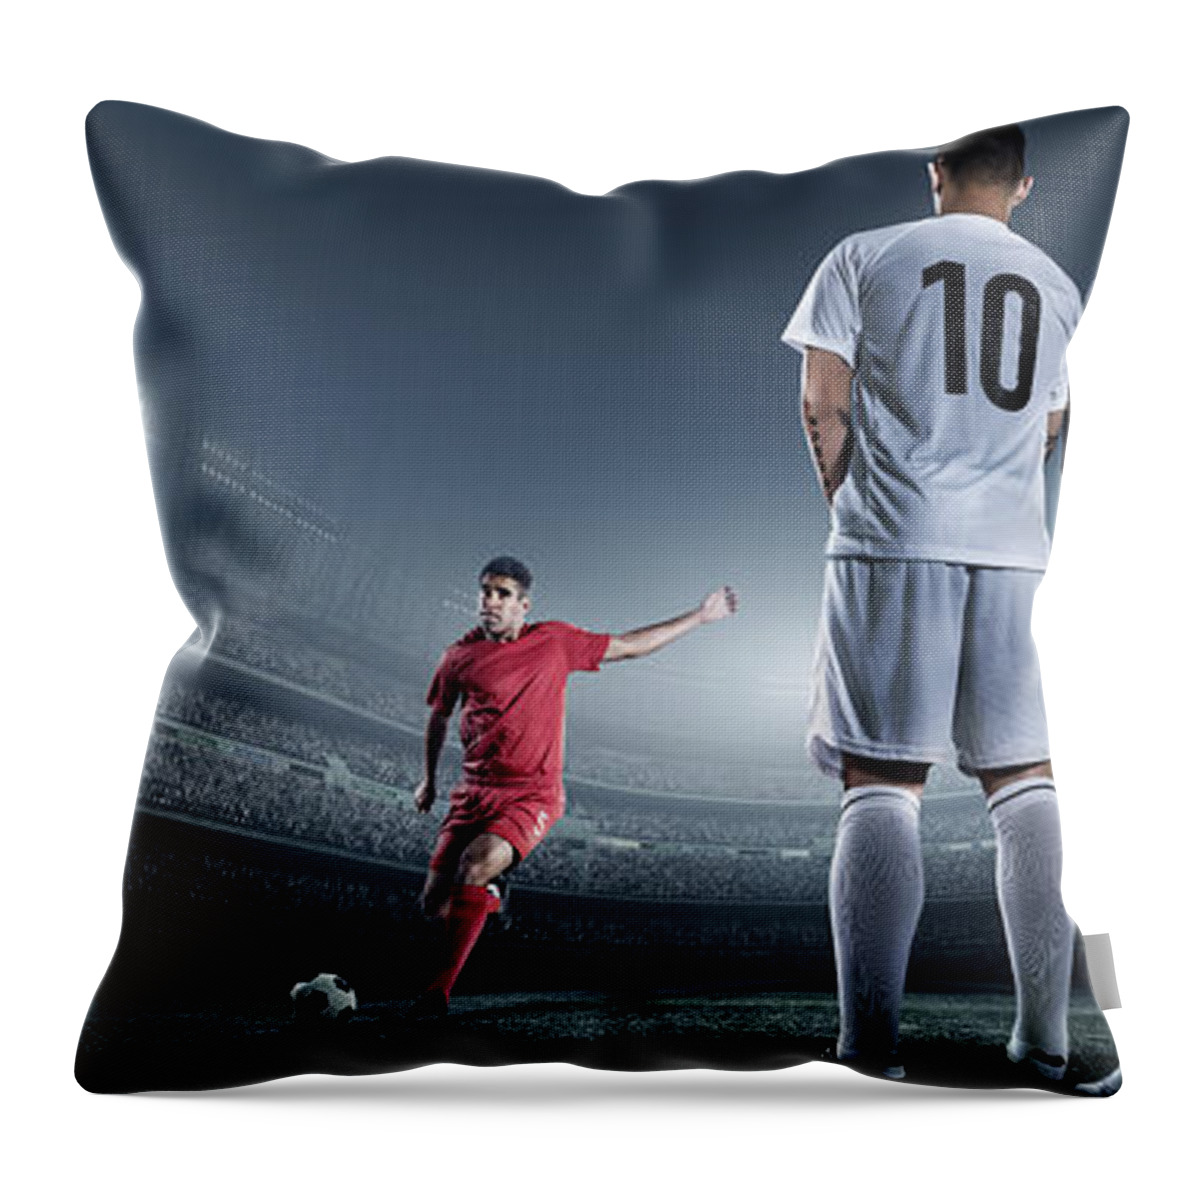 Soccer Uniform Throw Pillow featuring the photograph Soccer Player Kicking Ball In Stadium #5 by Dmytro Aksonov